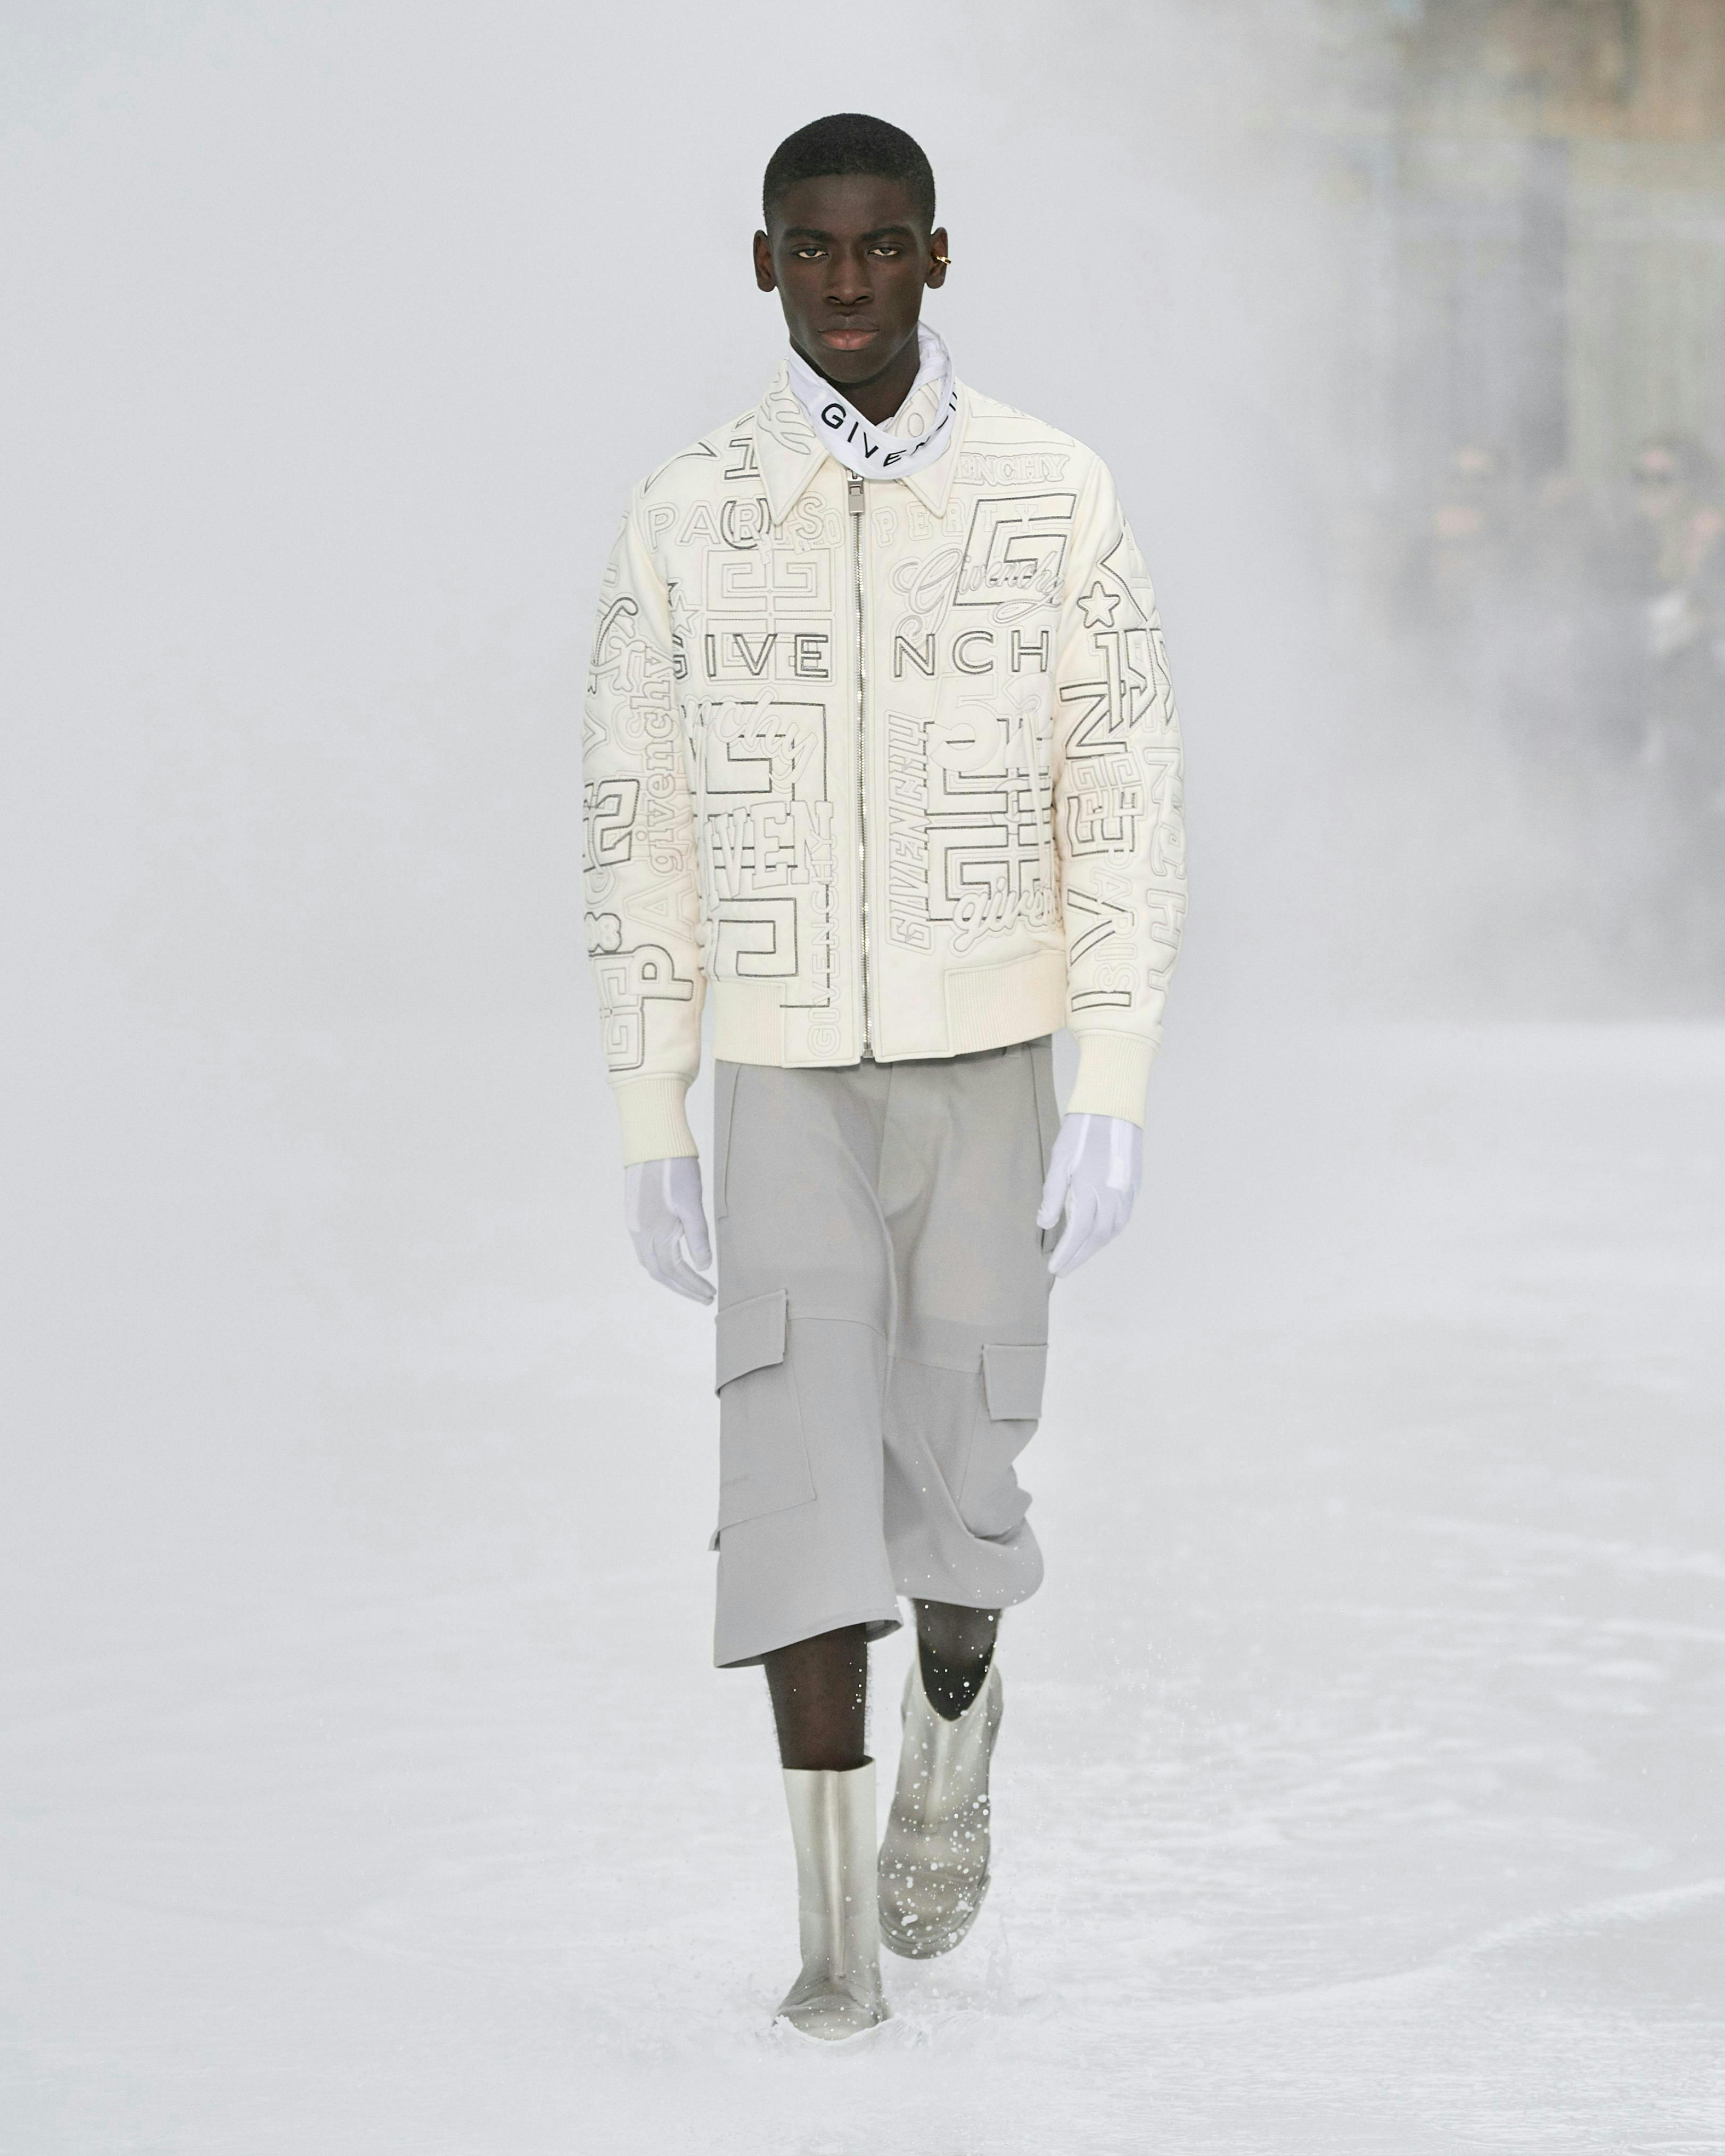 Model for Givenchy wearing a cream jacket and grey cargos.